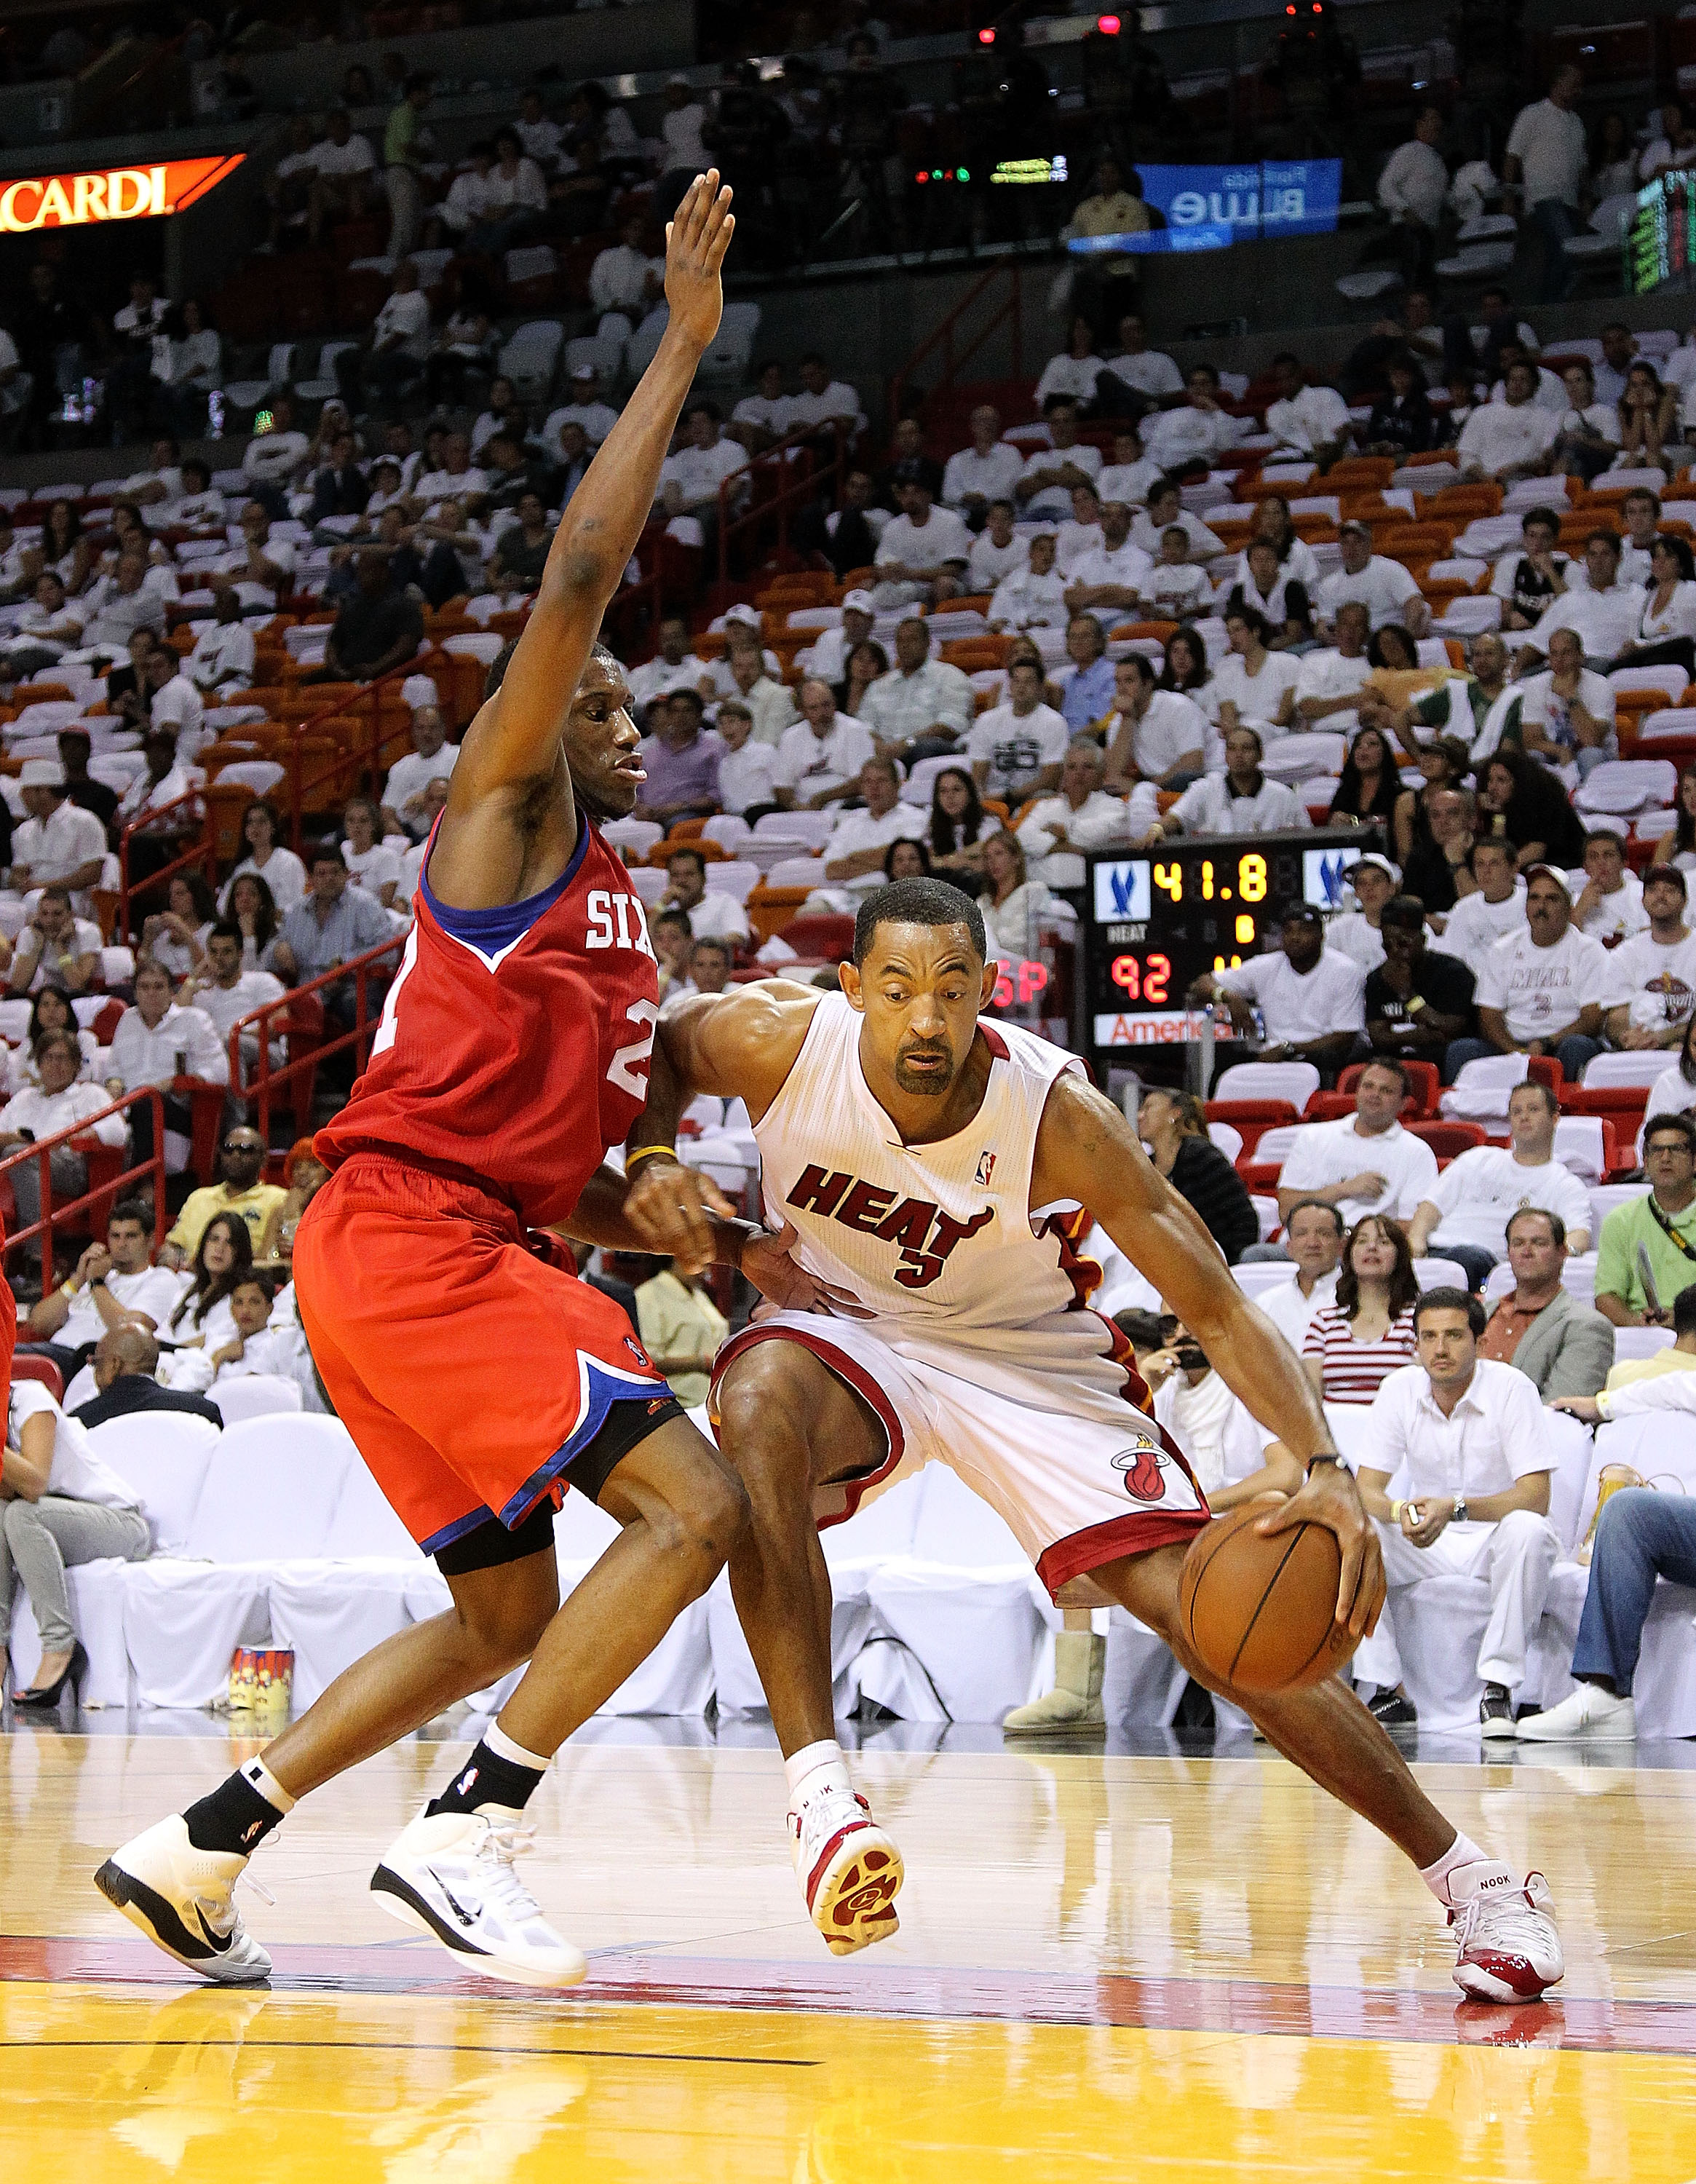 MIAMI, FL - APRIL 18:  Juwan Howard #5 of the Miami Heat drives around Thaddeus Young #21 of the Philadelphia 76ers during game two of the Eastern Conference Quarterfinals at American Airlines Arena on April 18, 2011 in Miami, Florida. NOTE TO USER: User